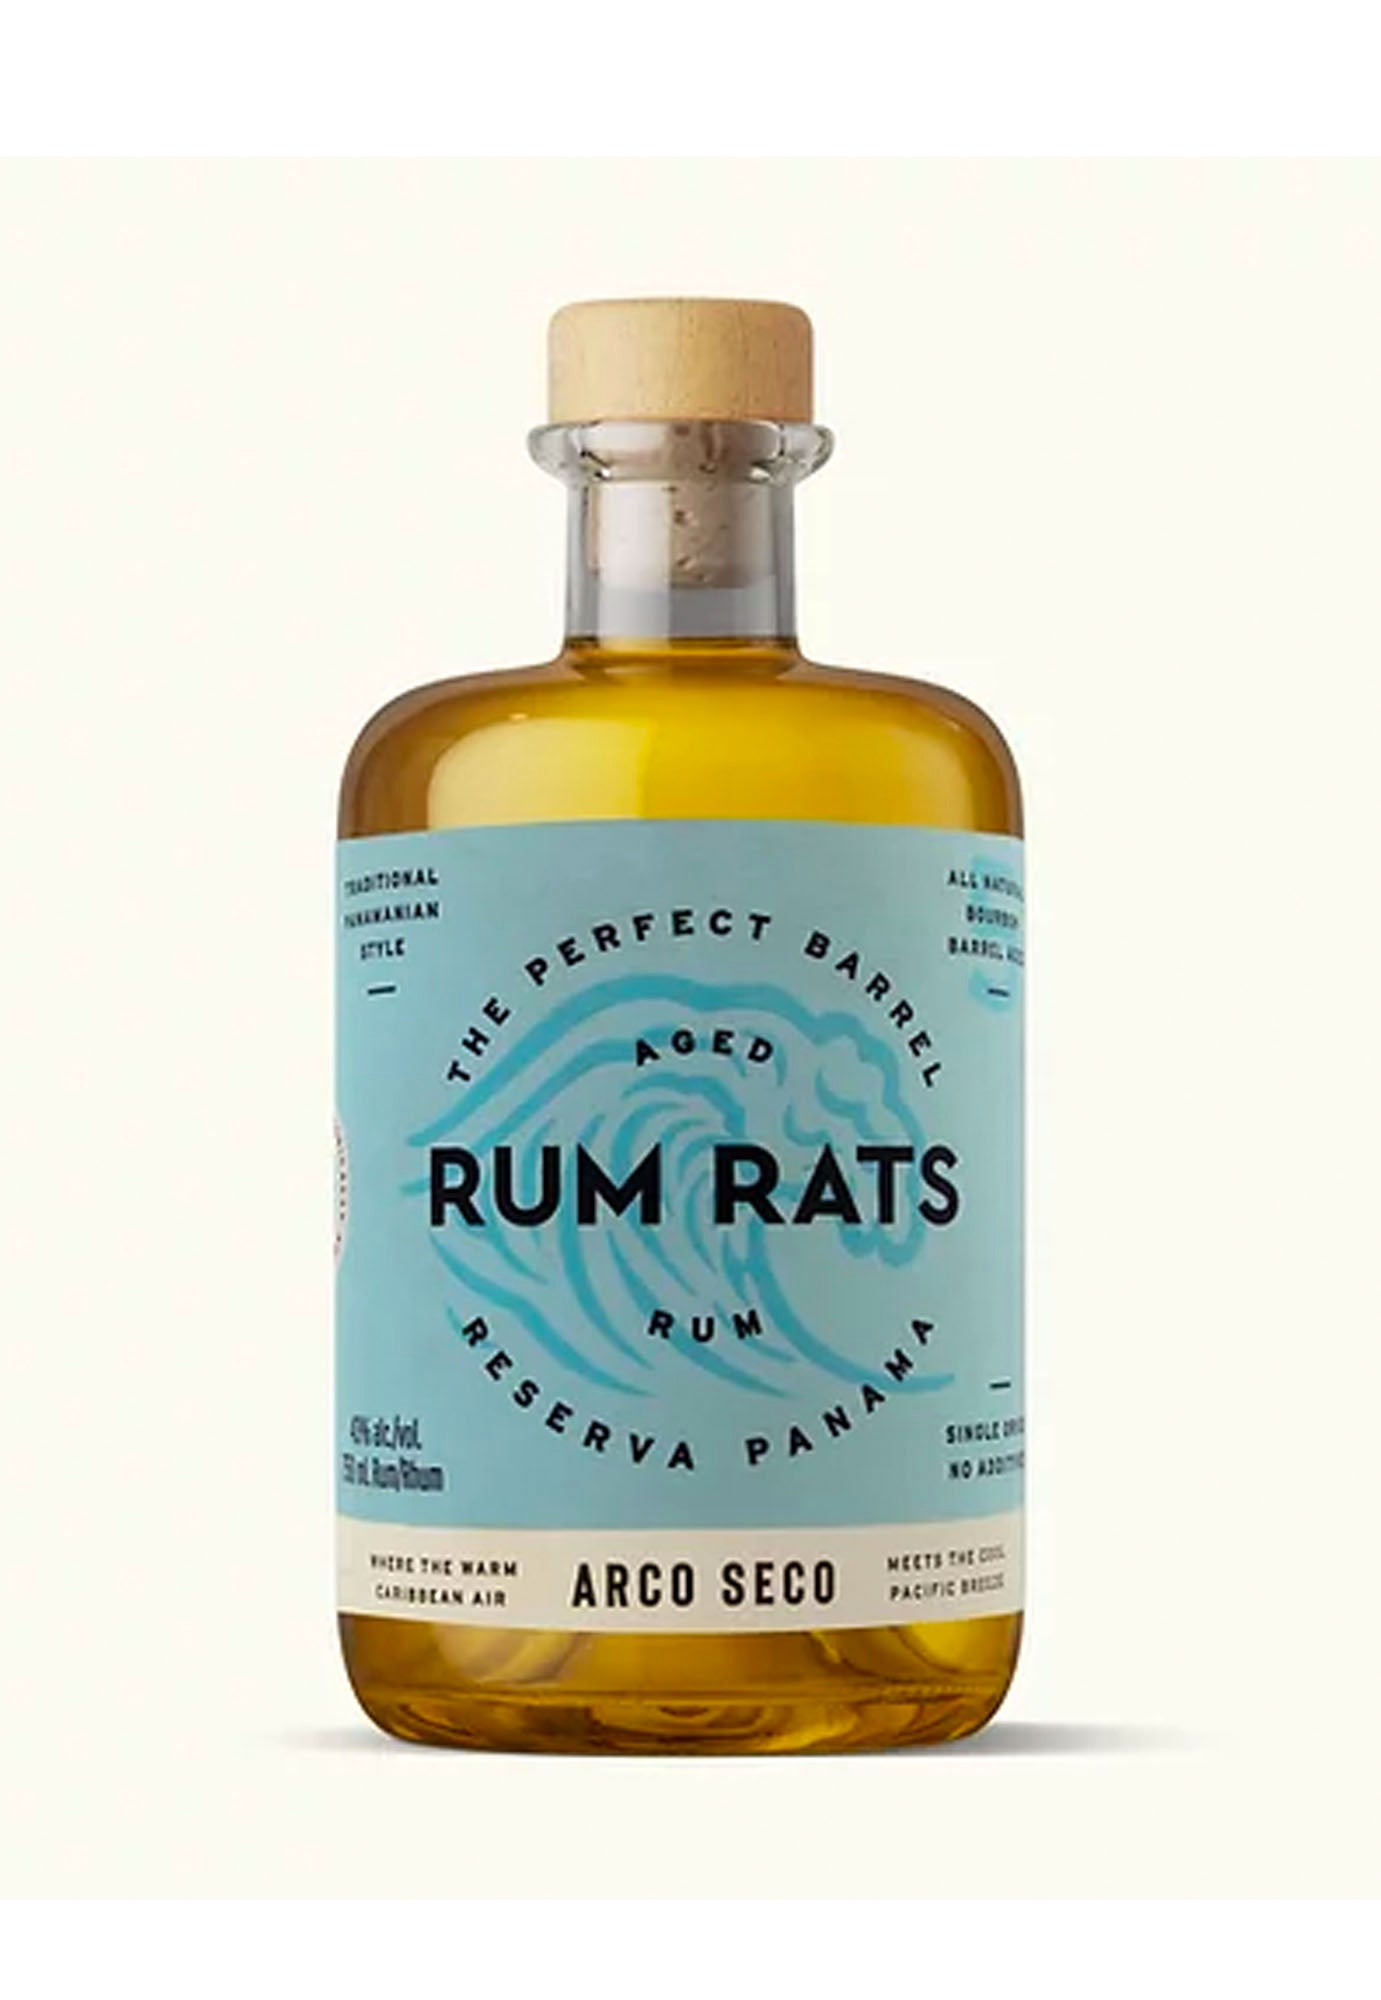 Rum Rats Arco Seco 5 Year Old